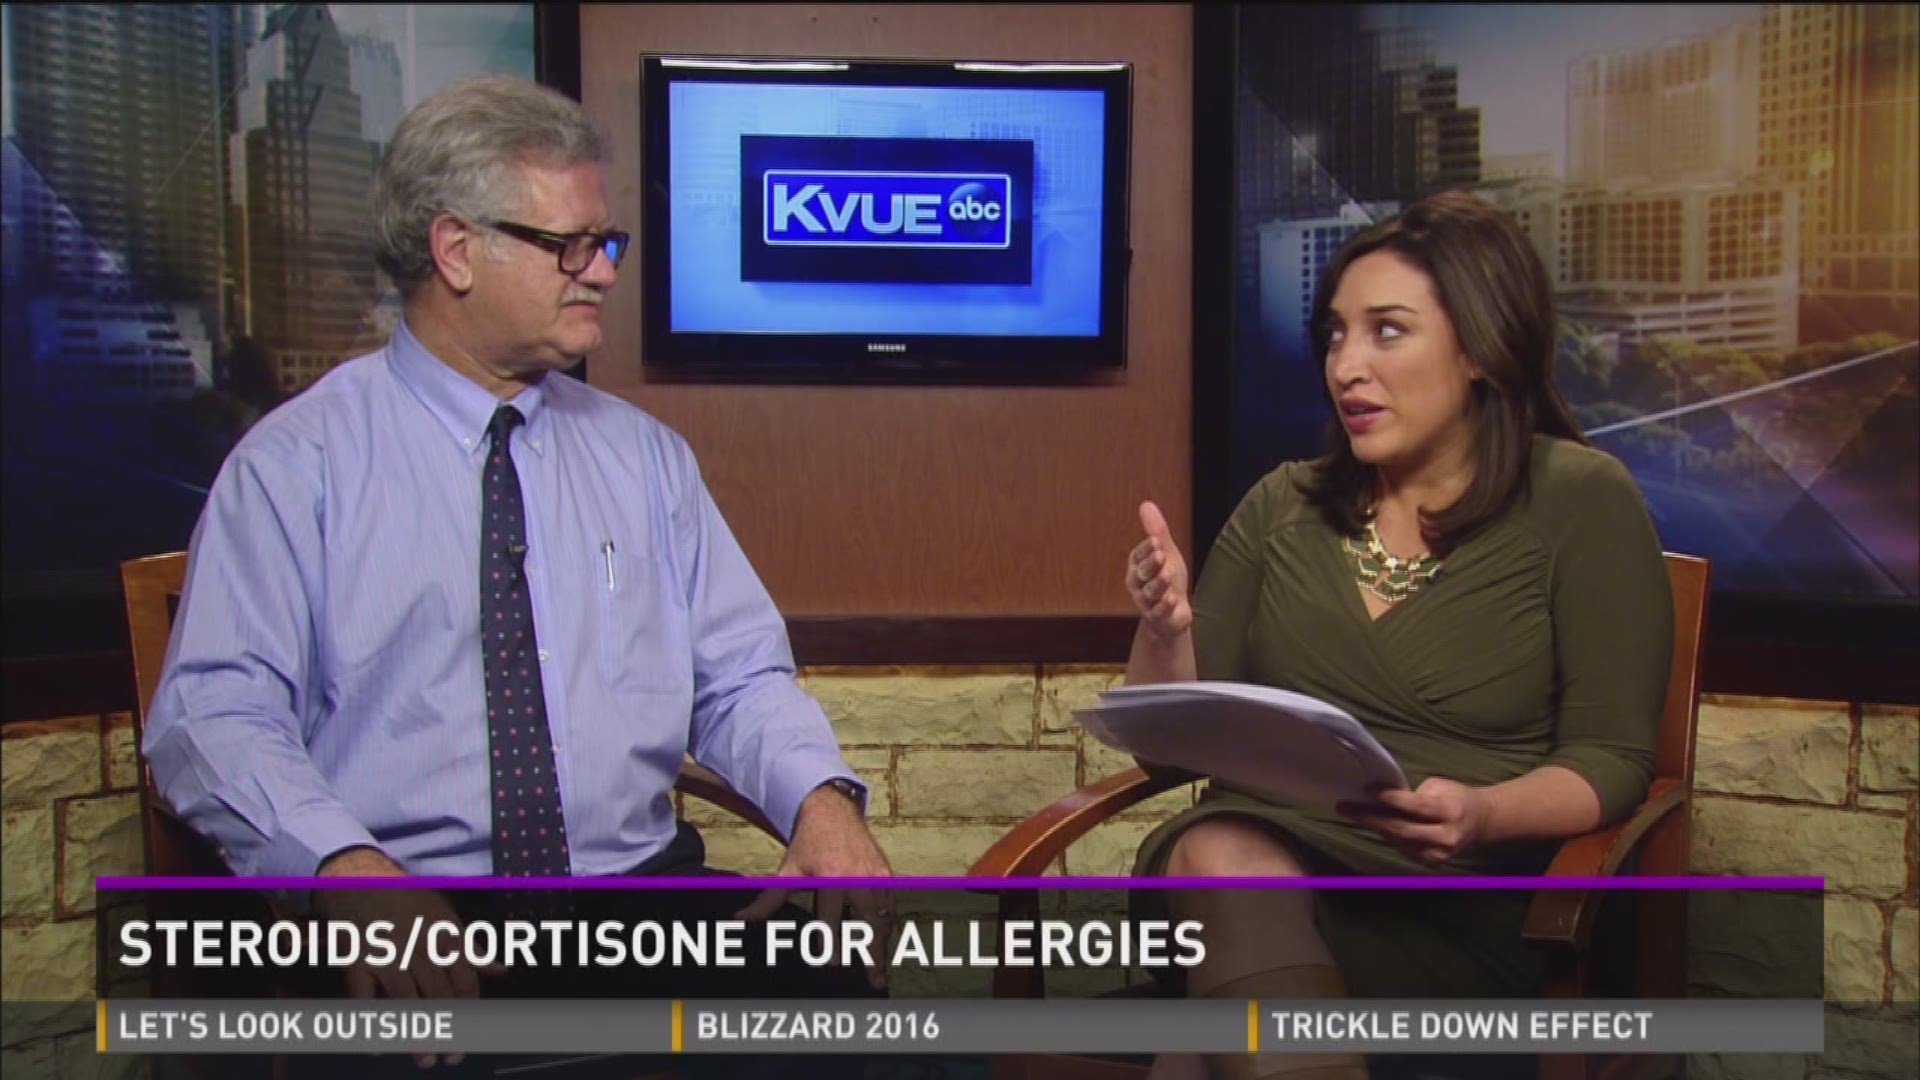 Allergy Tuesday: Steroids/cortisone for allergies